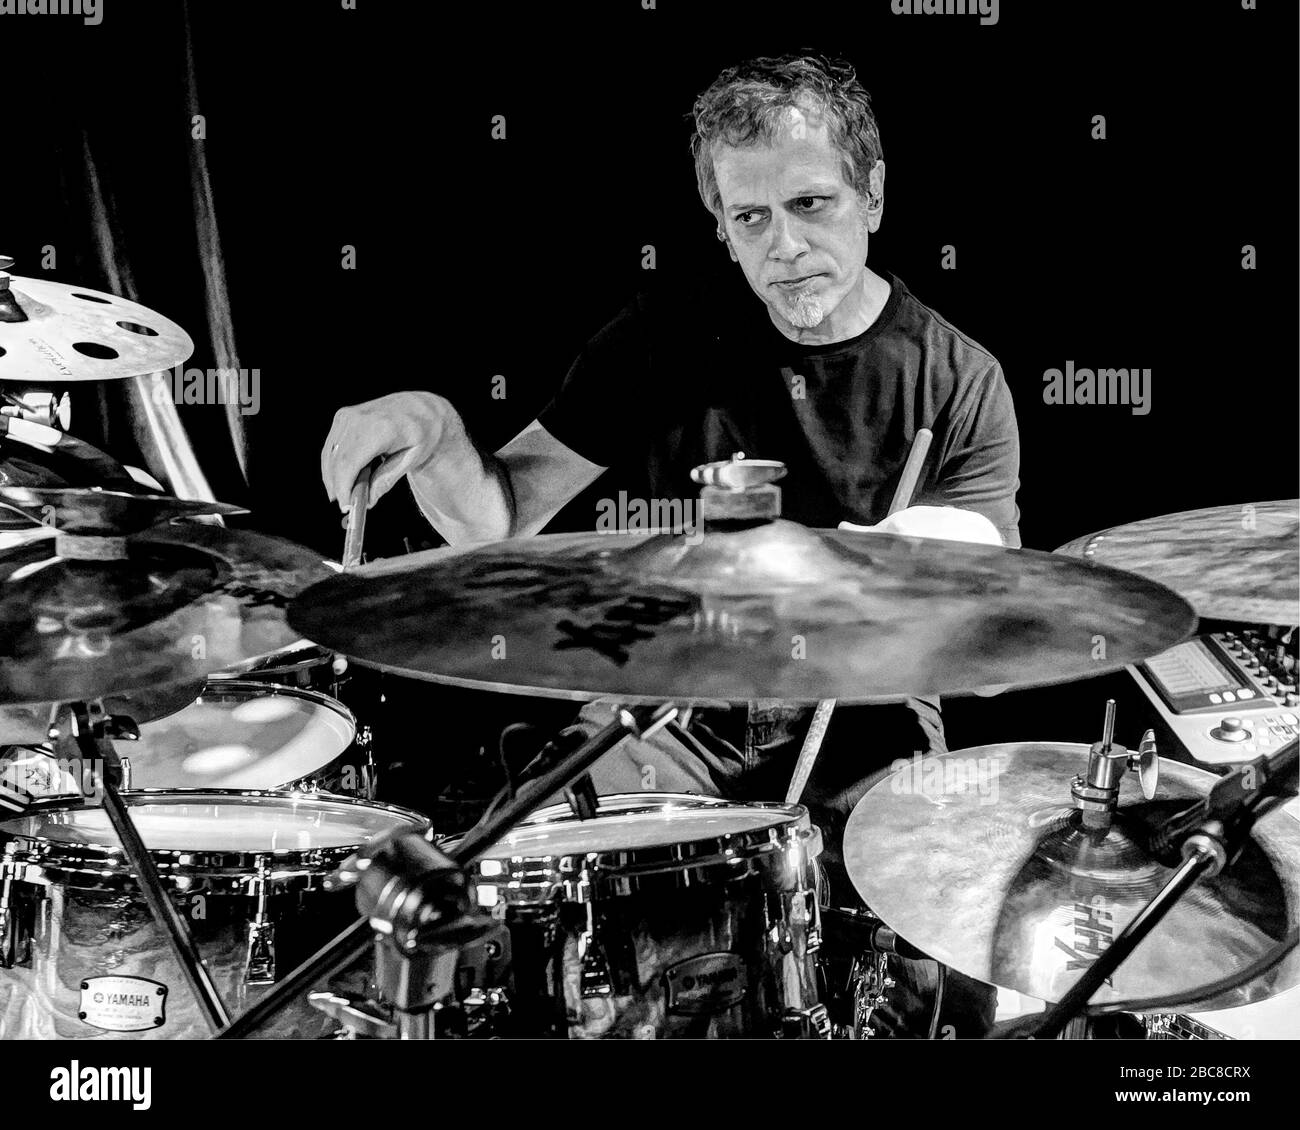 Drummer Dave Weckl warms up before a show with Oz Noy at 3rd and